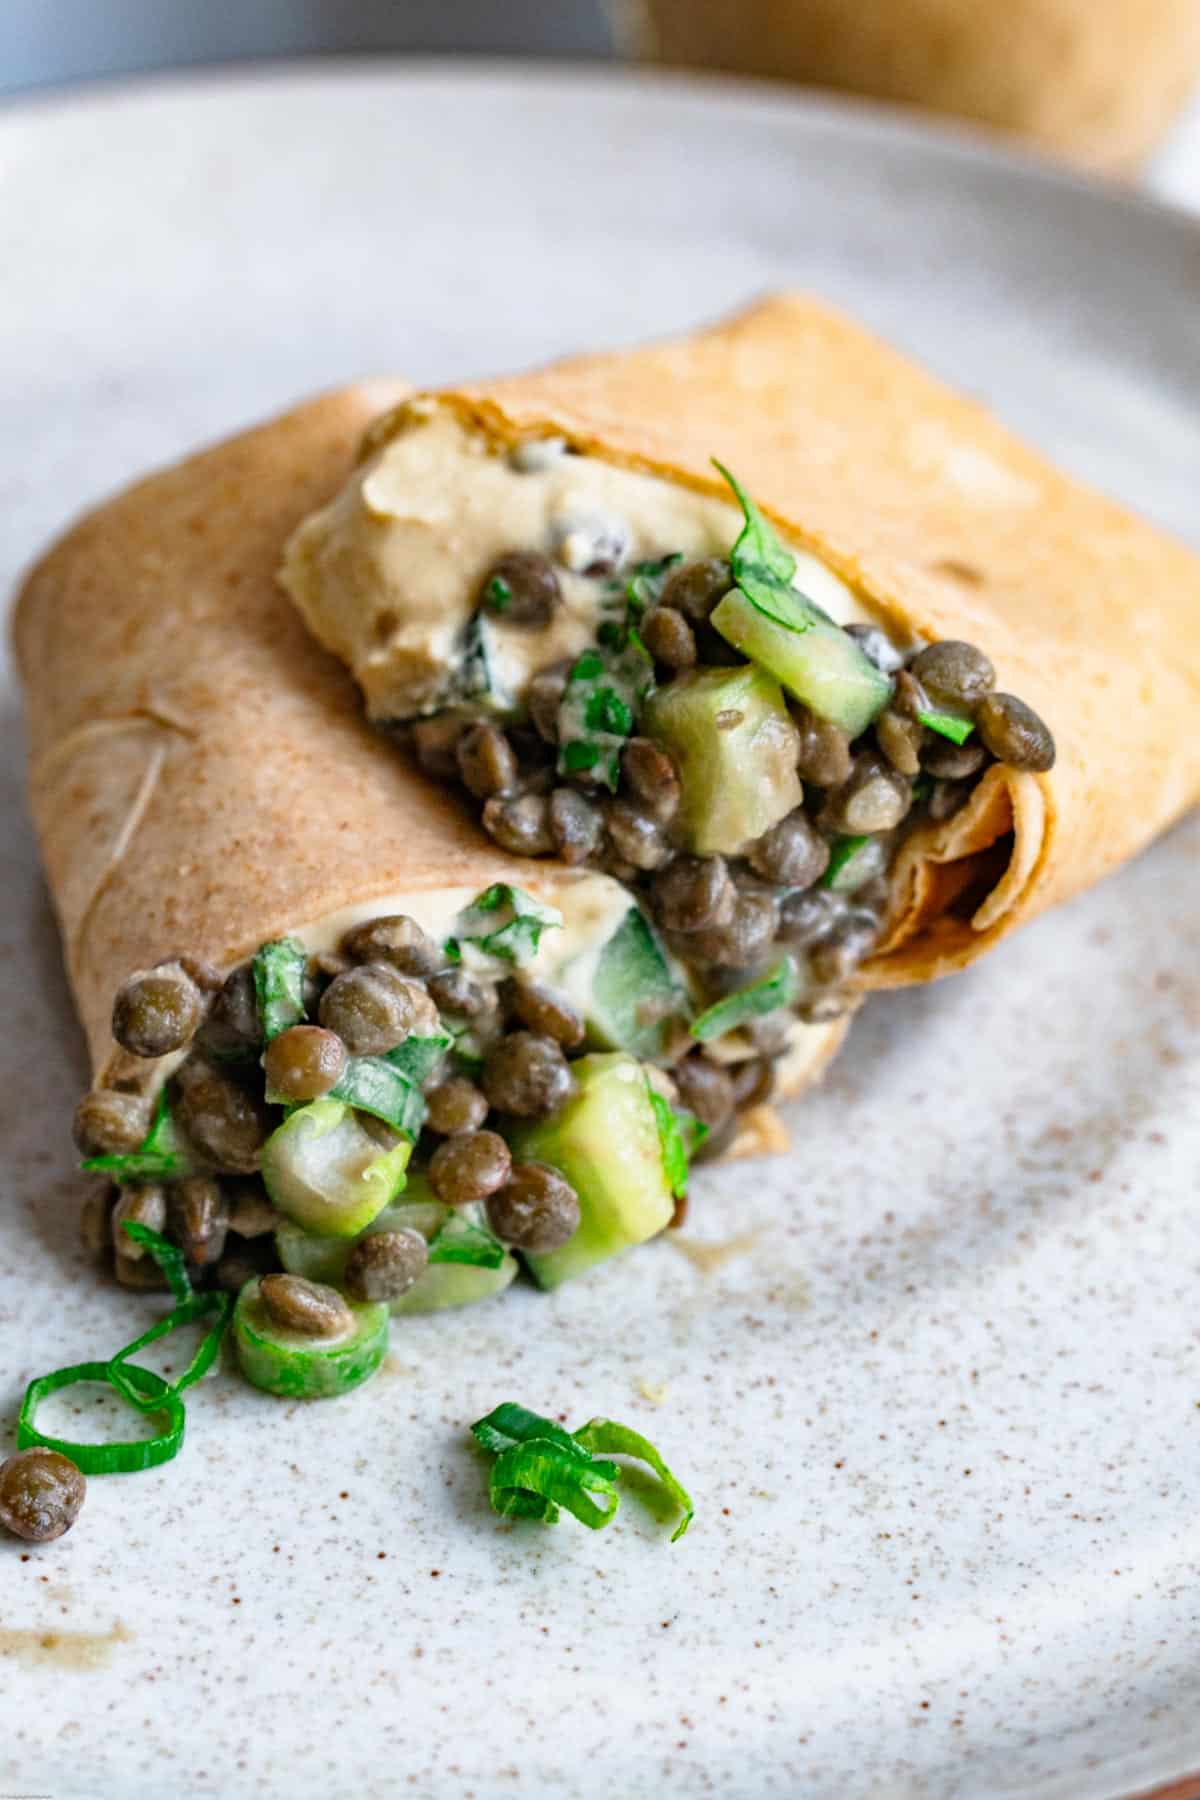 Homemade high-protein lentil salad wraps with cucumbers